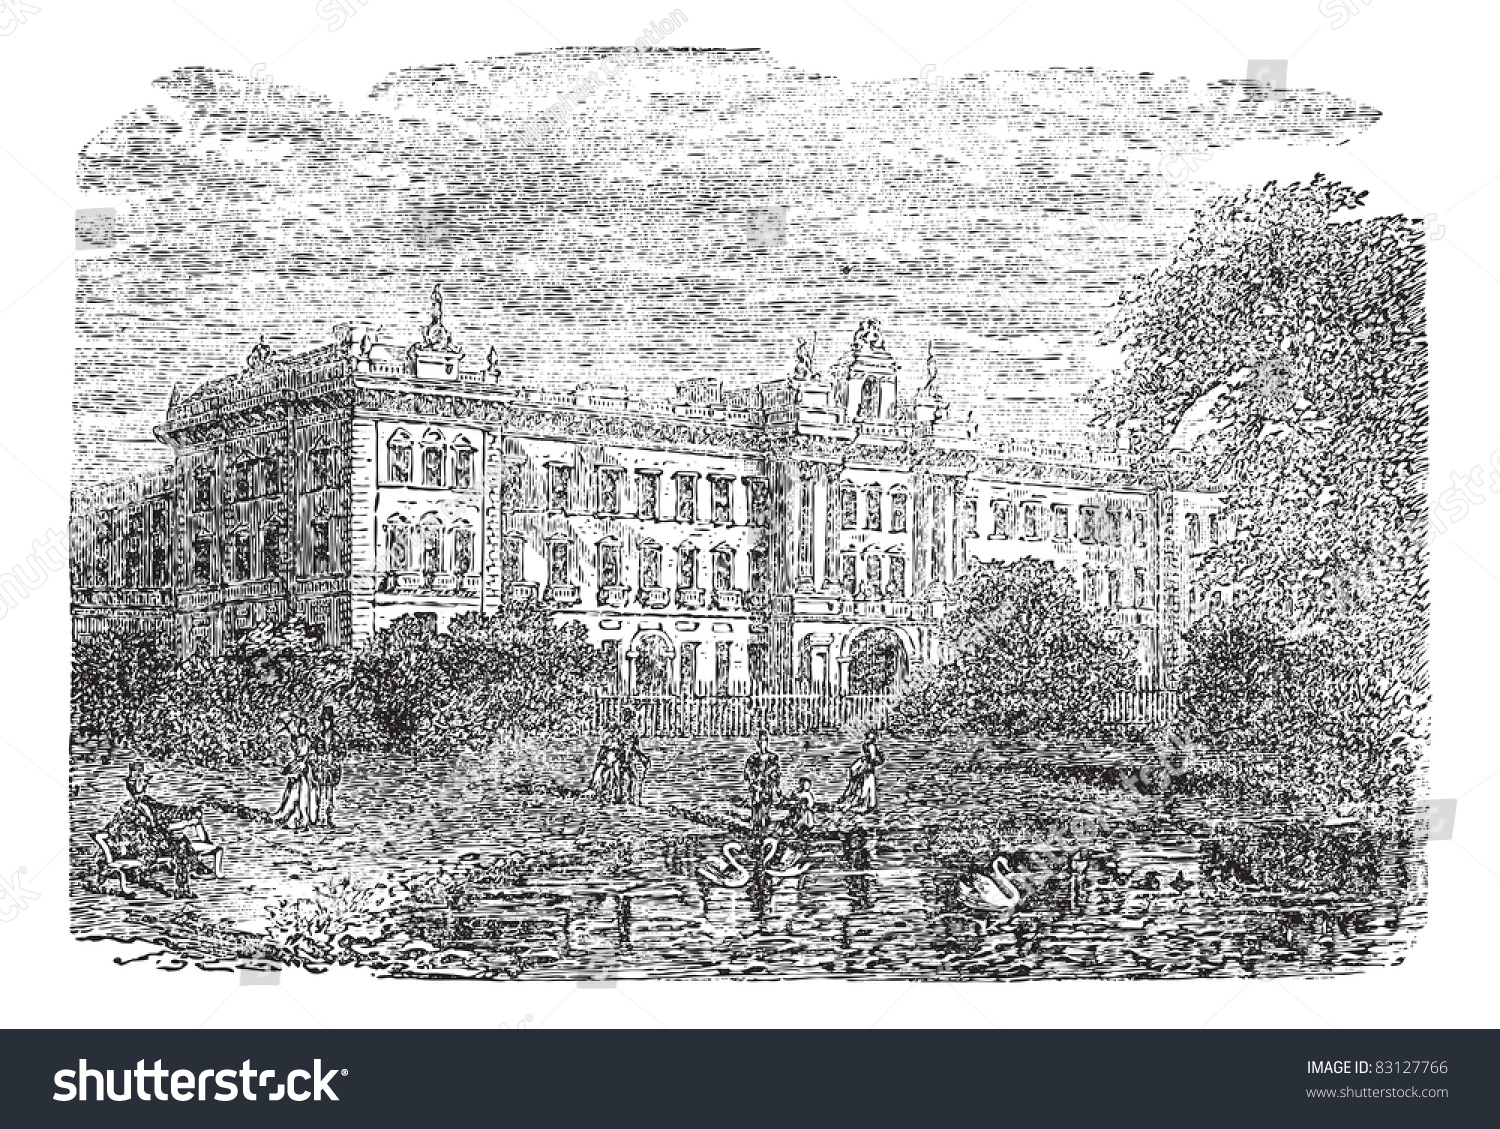 SVG of Buckingham Palace or Buckingham House in London, England, during the 1890s, vintage engraving. Illustration of Buckingham Palace with lake and people in front. Trousset encyclopedia (1886 - 1891). svg